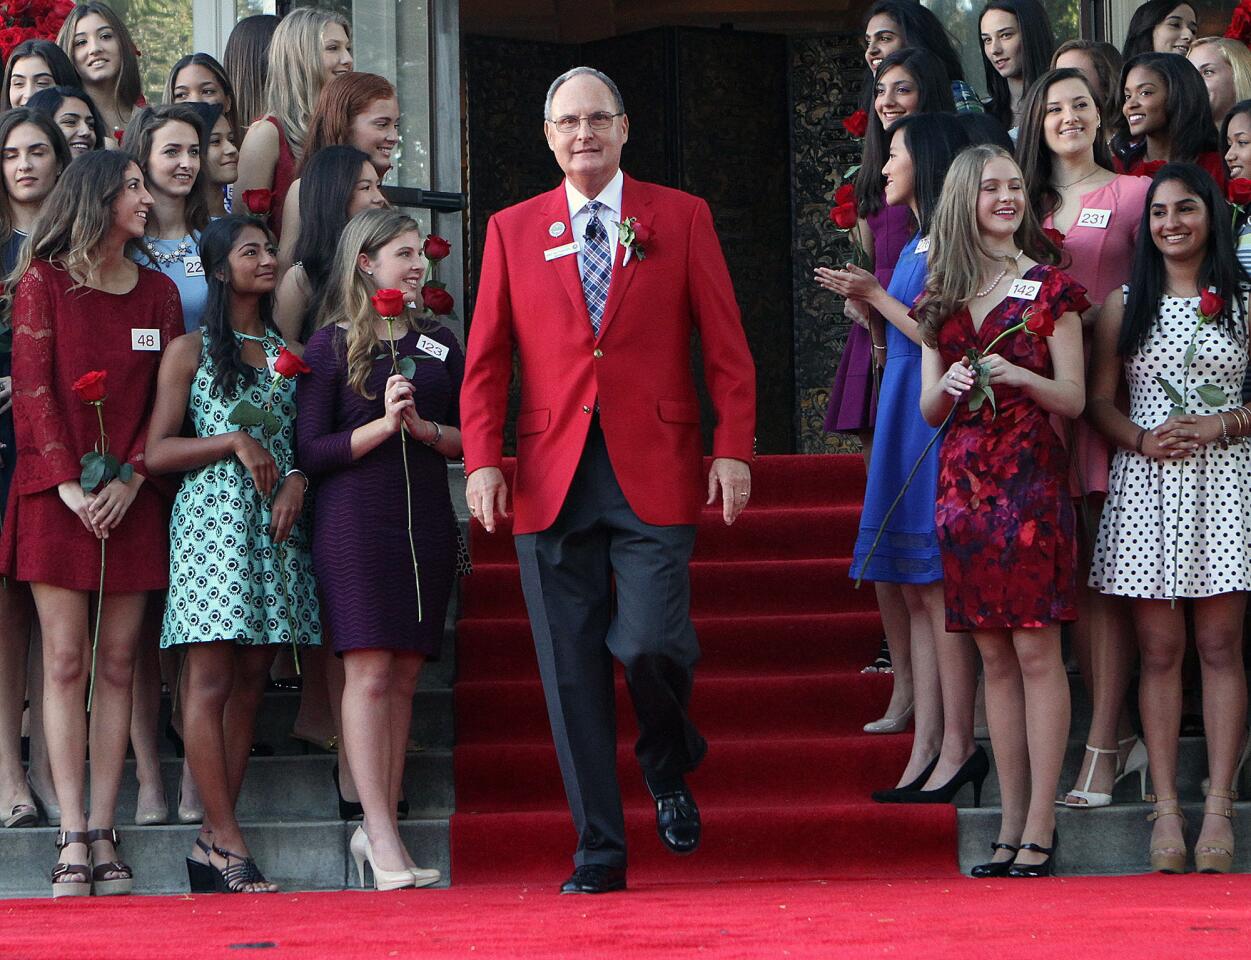 2016 Tournament of Roses President Mike Matthiessen walks onto the stage to announce the Royal Court at the announcement of the 2016 Tournament of Roses Royal Court at the Tournament House in Pasadena on Monday, Oct. 5, 2015.